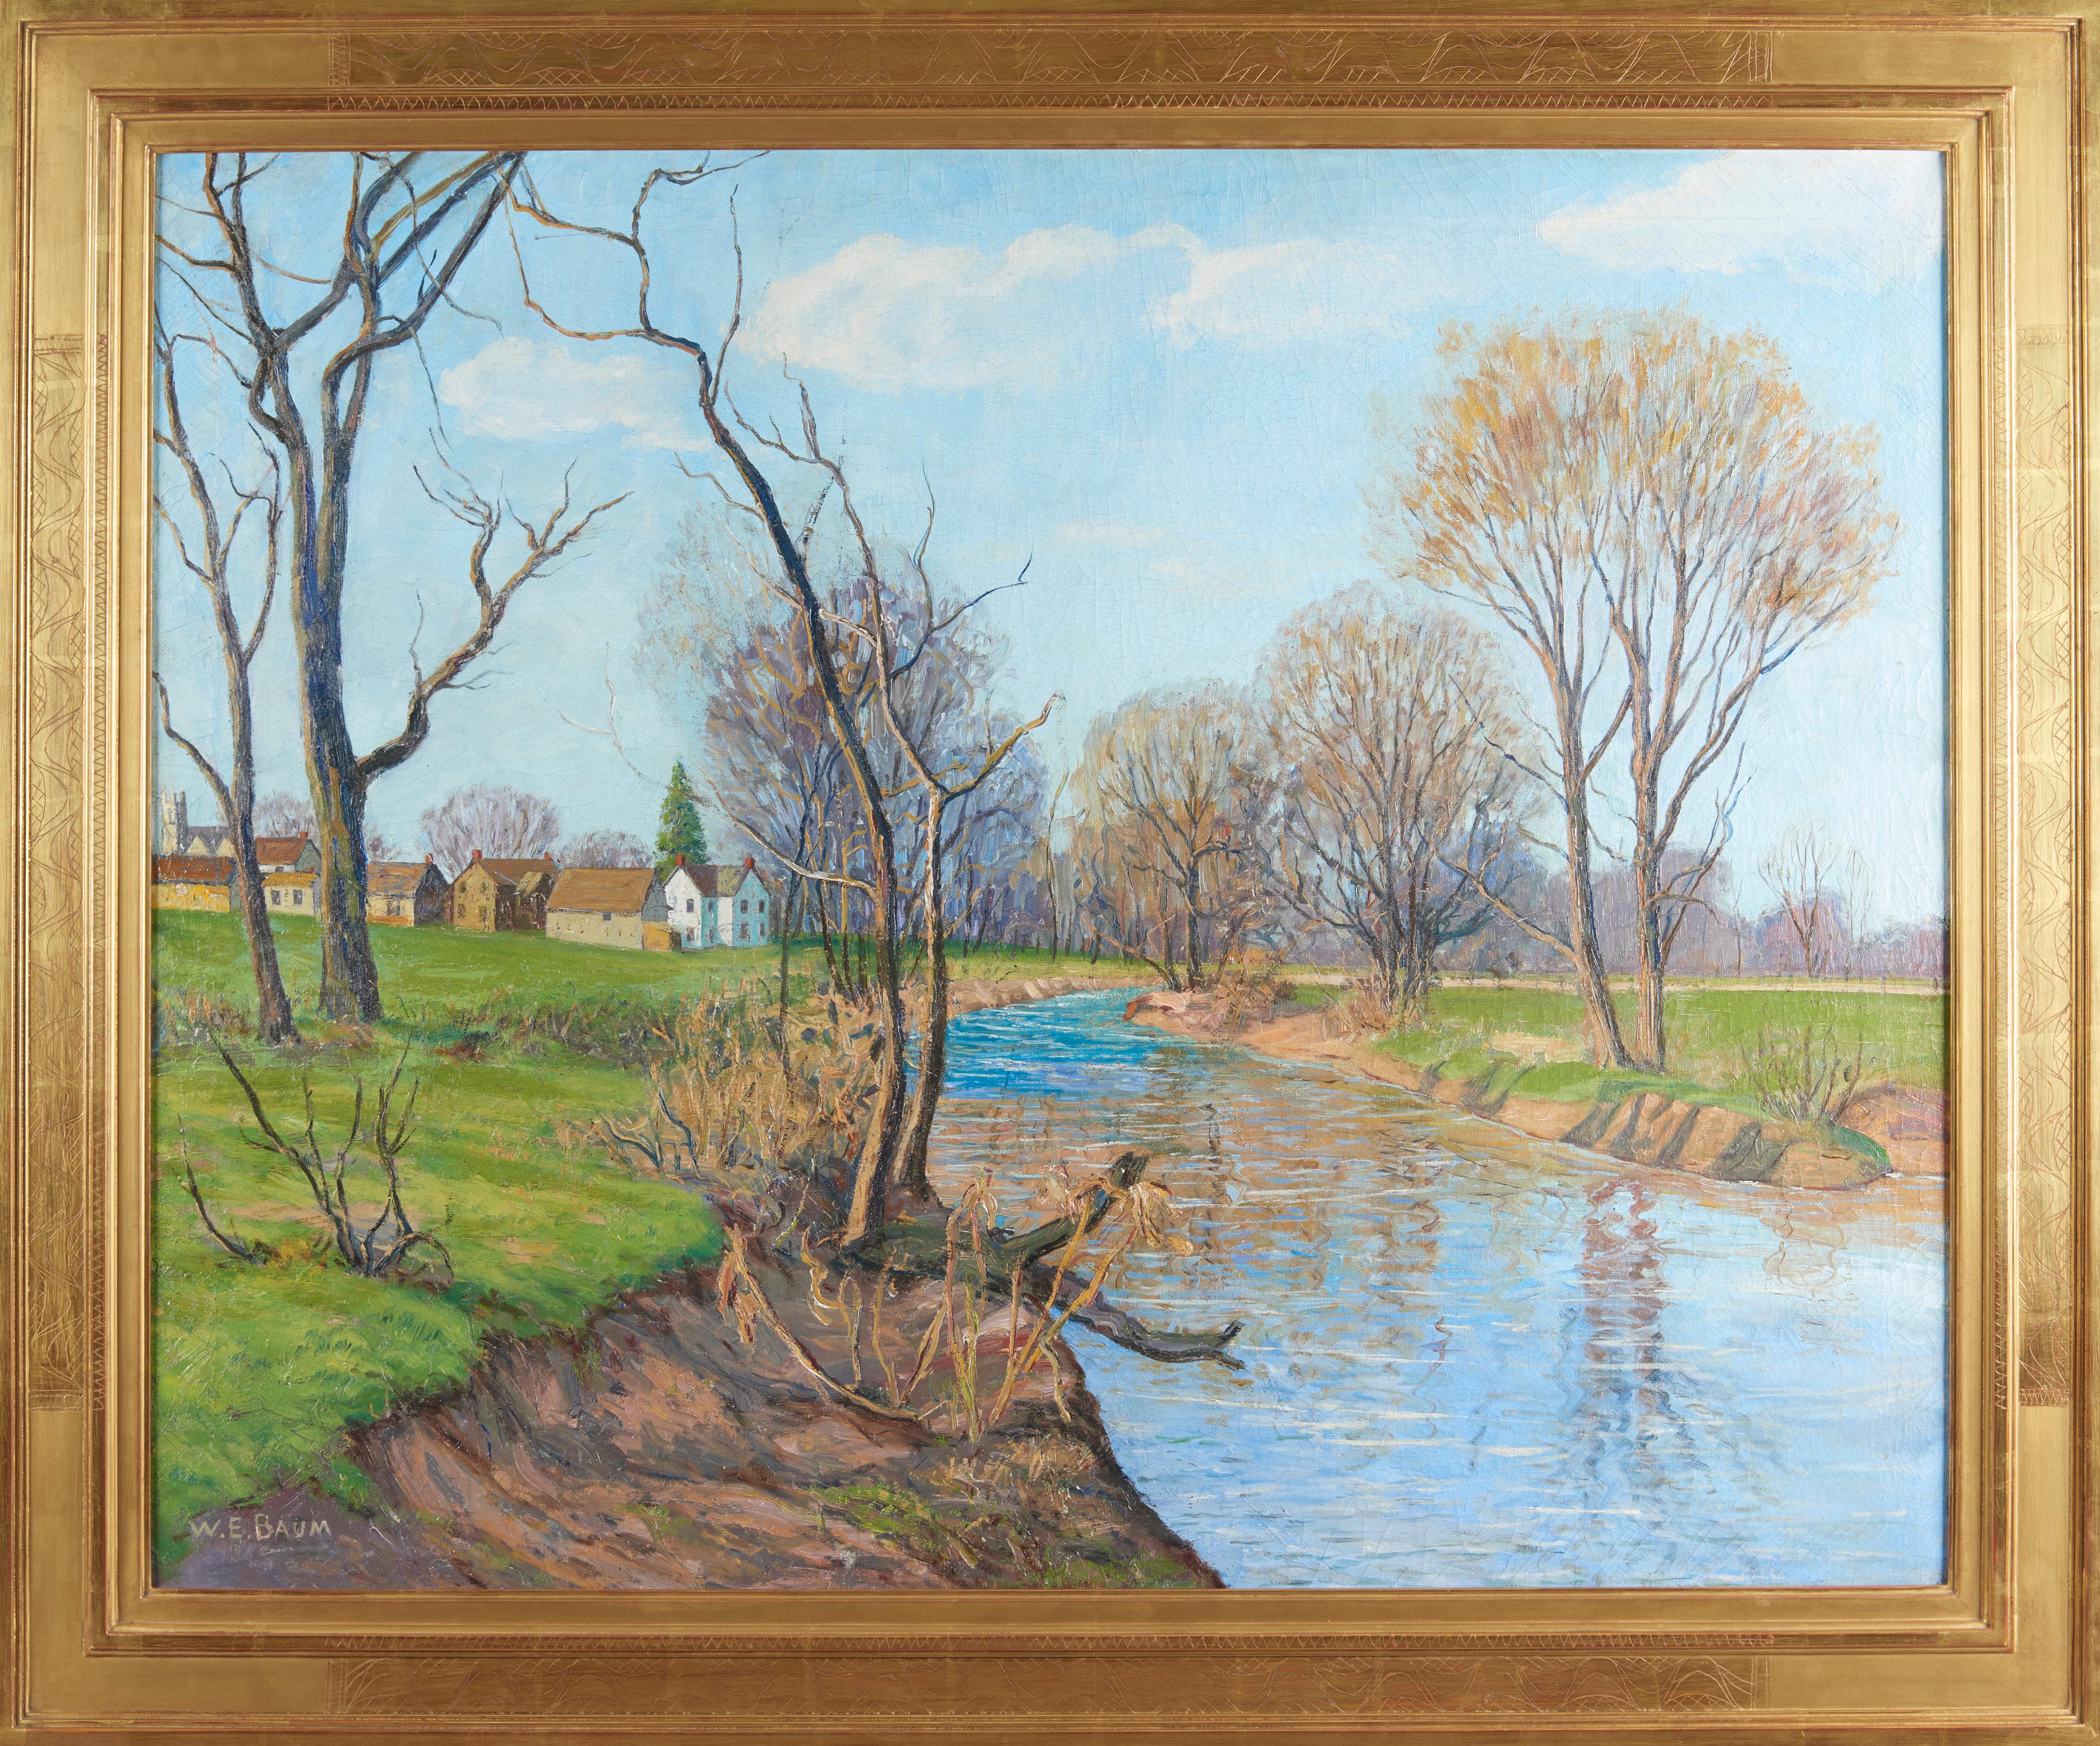 Large oil on canvas painting of a landscape with a creek and several houses. Titled 